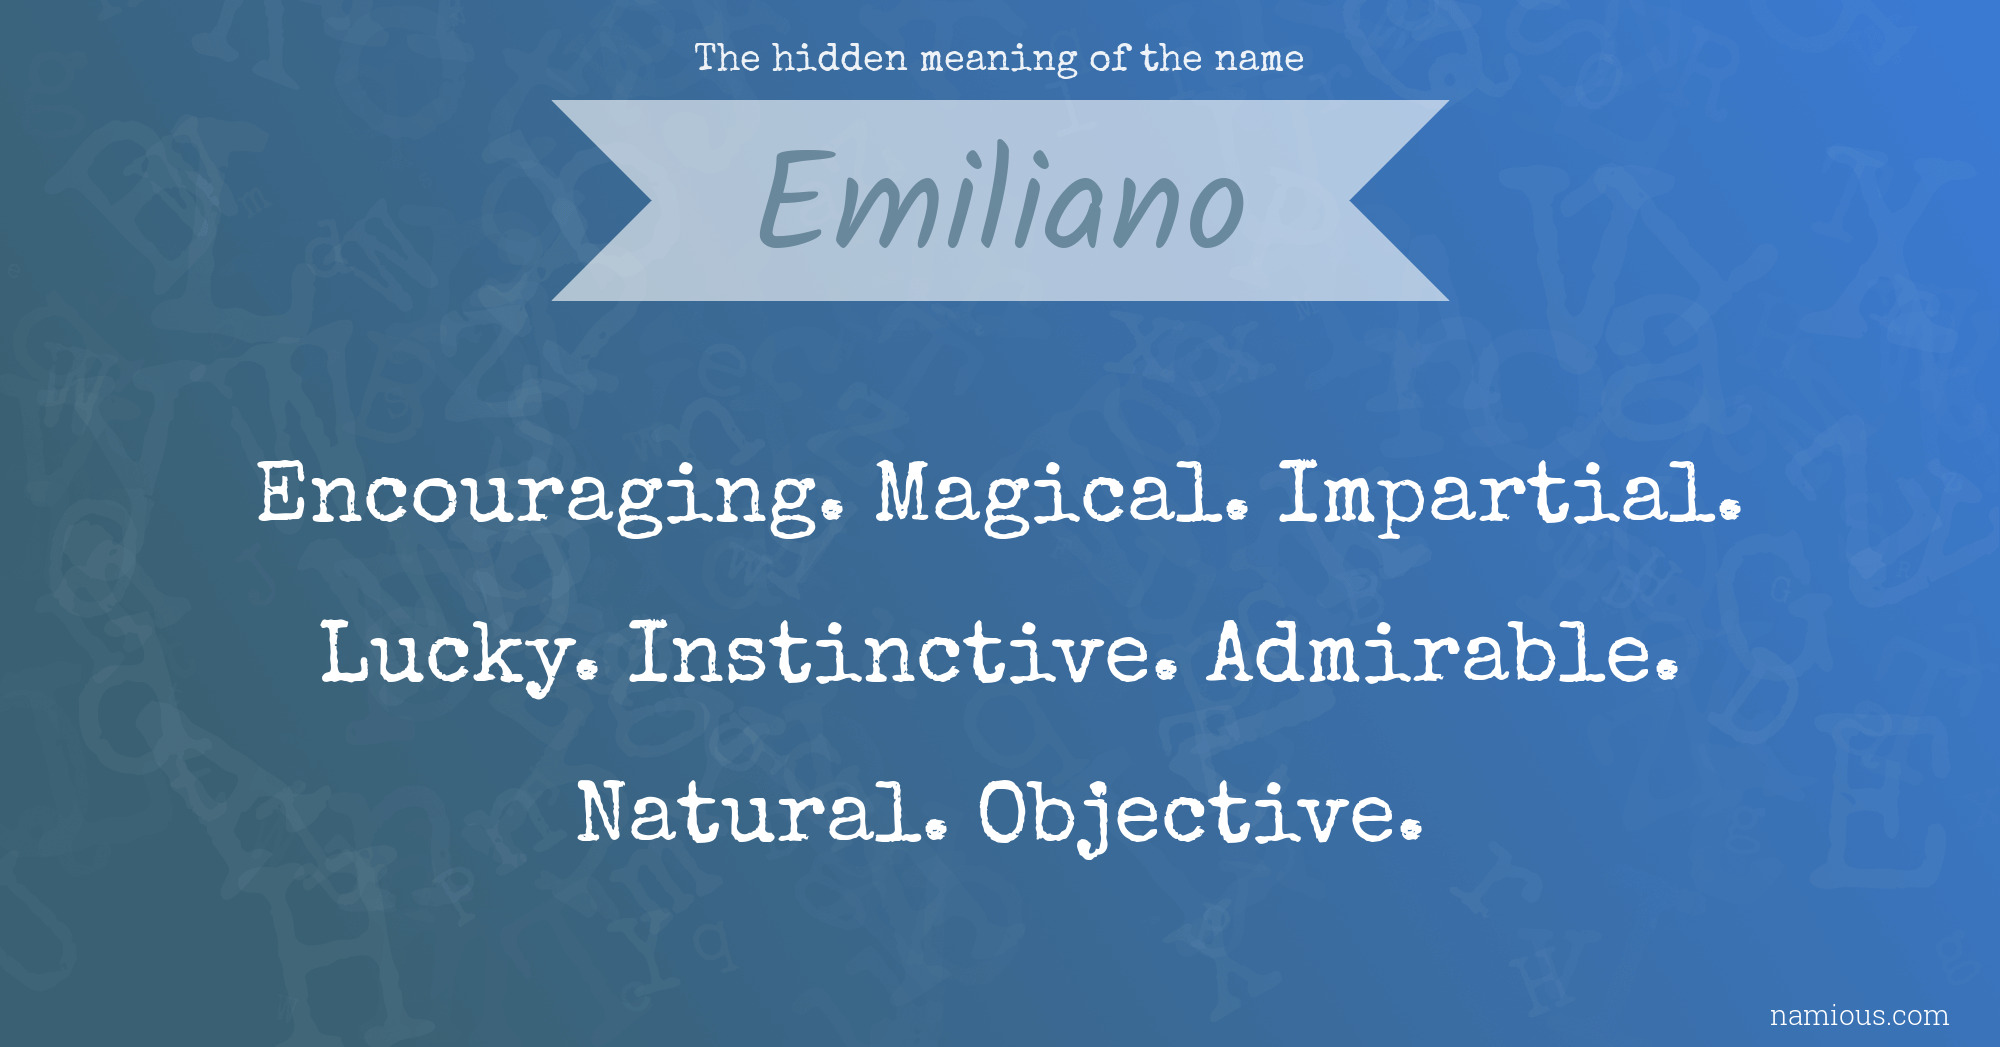 The hidden meaning of the name Emiliano